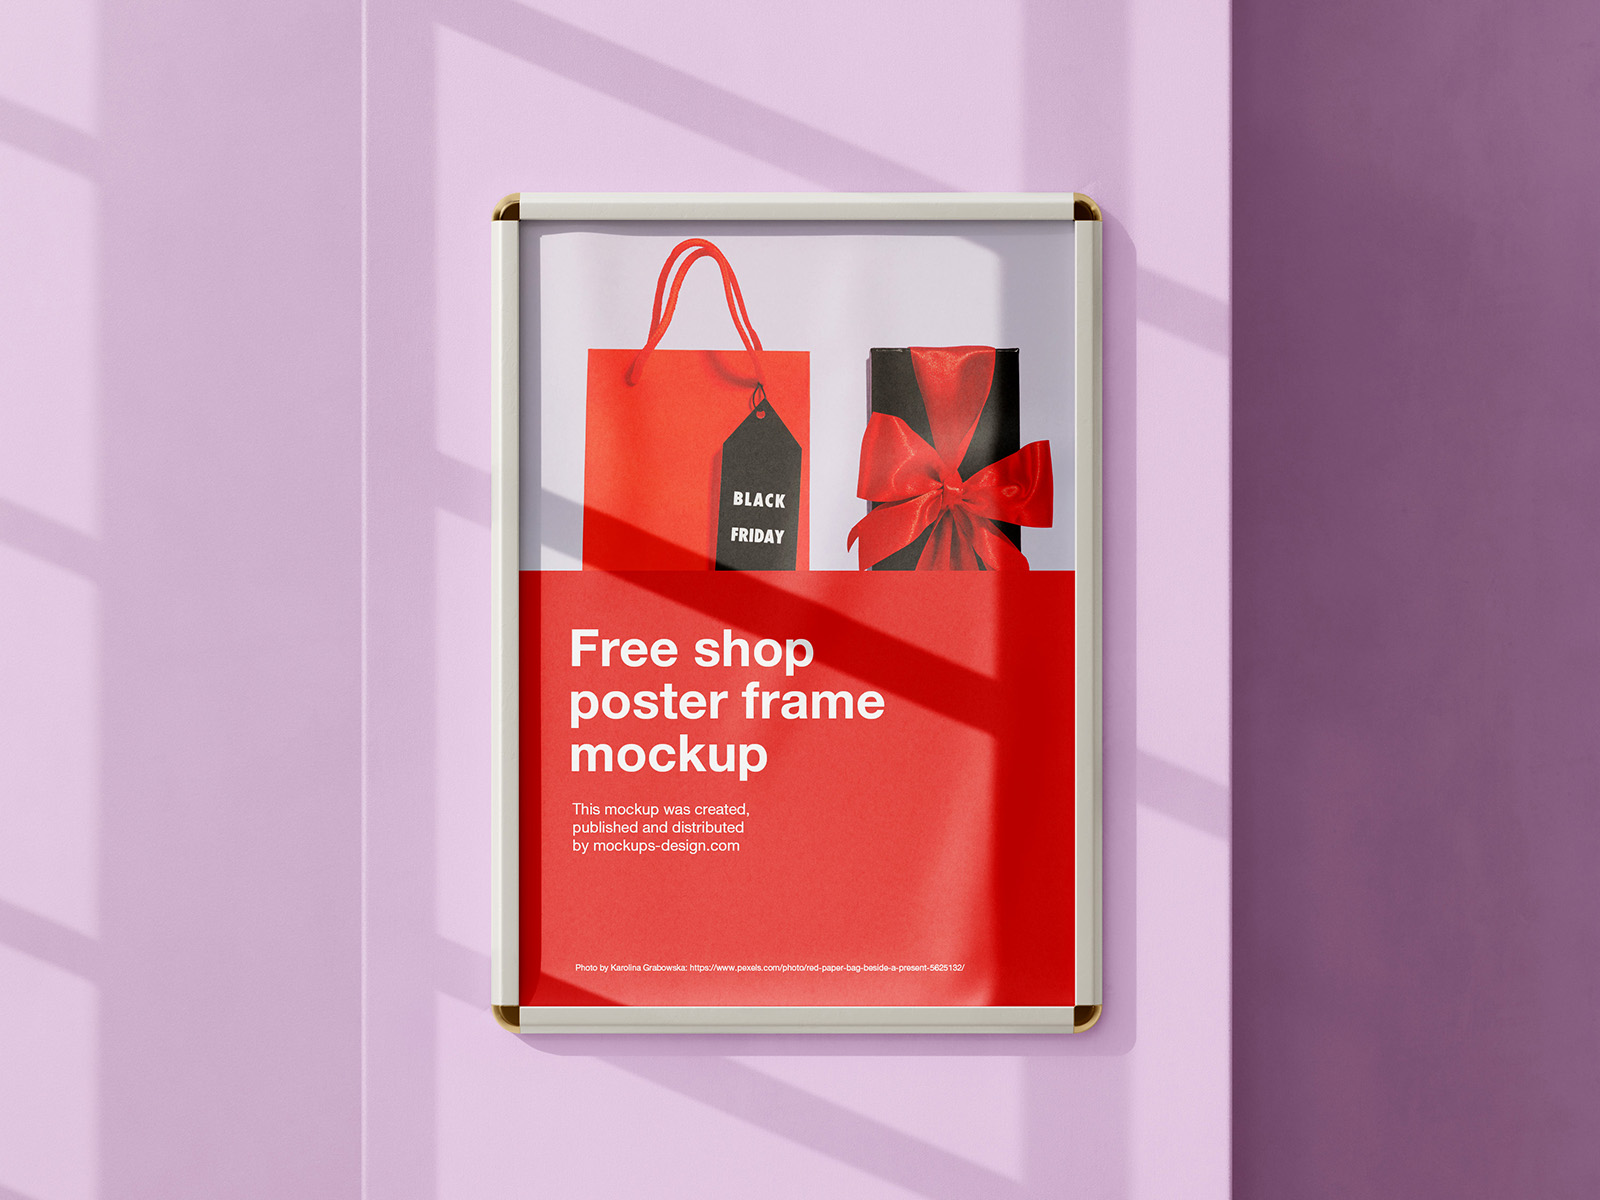 3 Mockups of Shop Poster Frame from Different Views FREE PSD